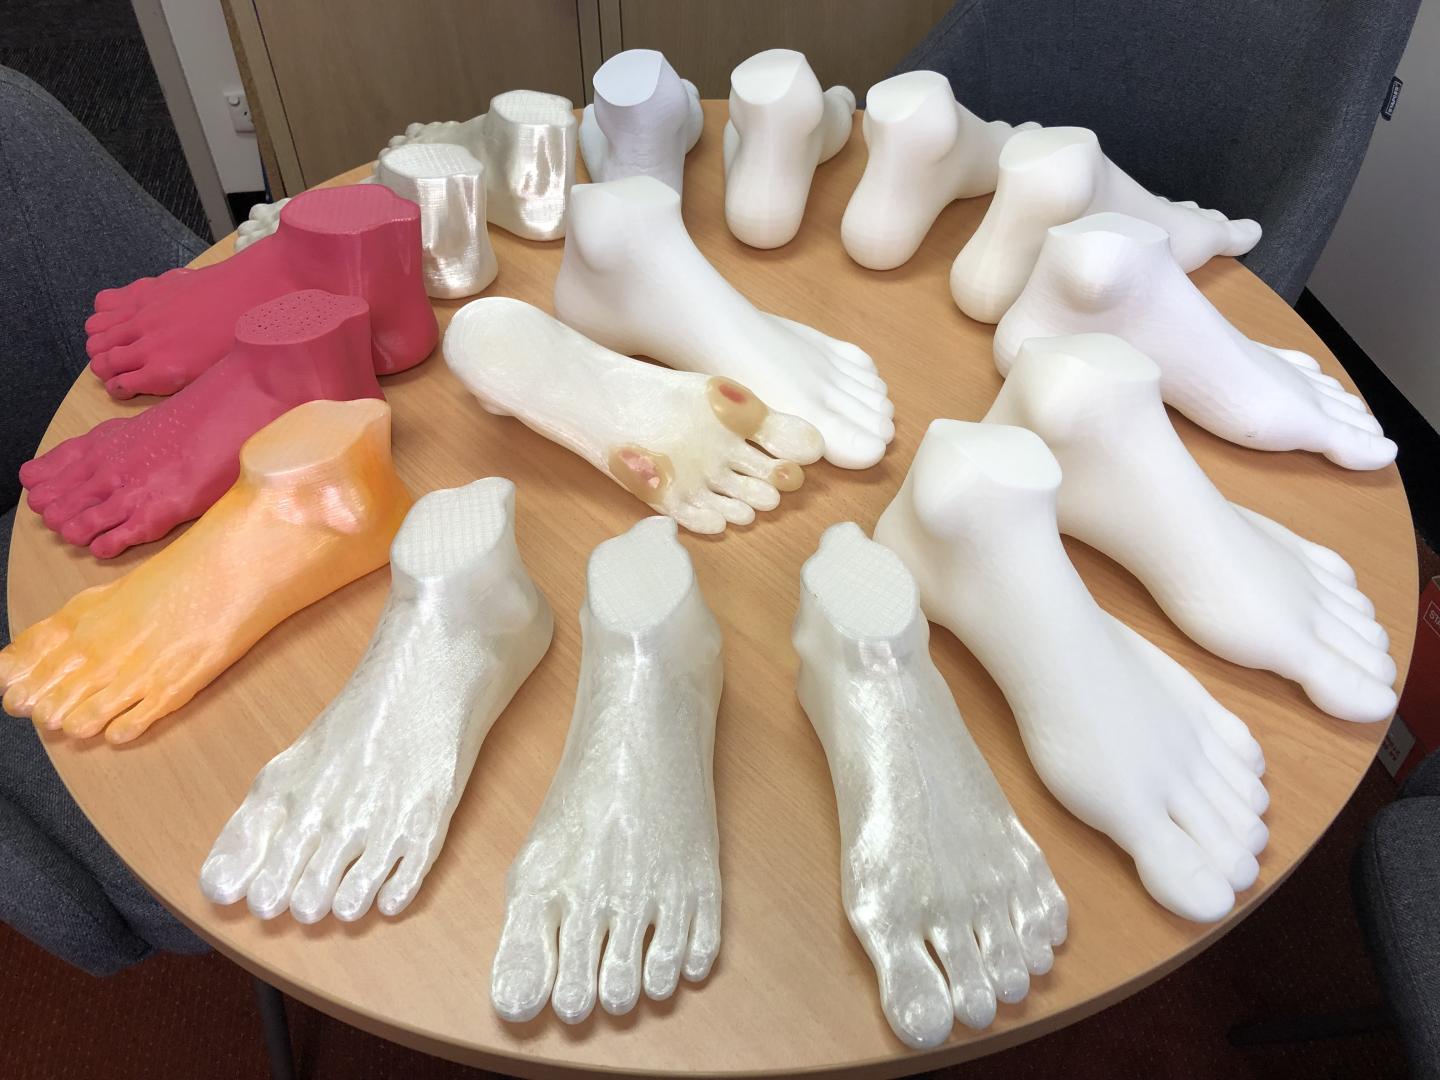 These are 3D-printed feet, some enhanced with foot ulcers